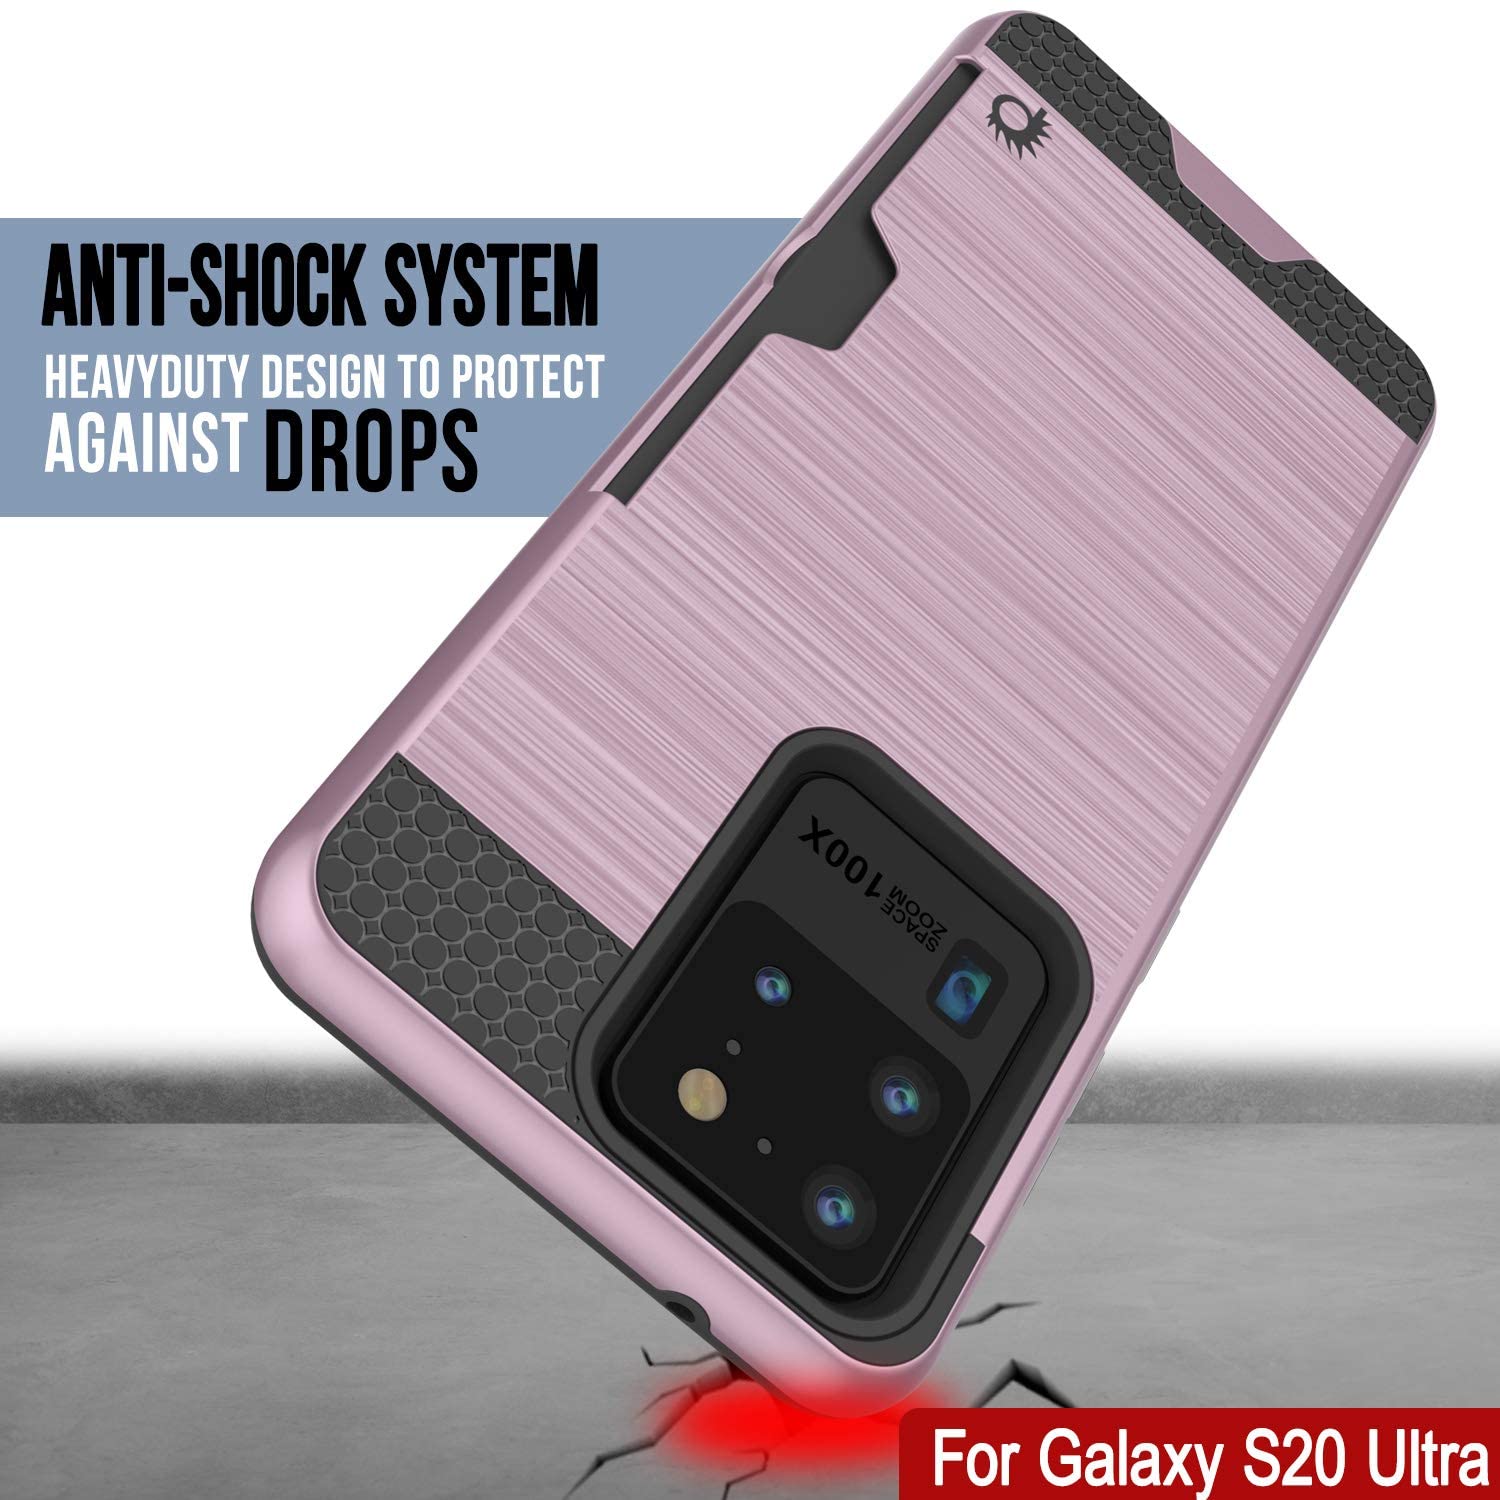 Galaxy S20 Ultra Case, PUNKcase [SLOT Series] [Slim Fit] Dual-Layer Armor Cover w/Integrated Anti-Shock System, Credit Card Slot [Pink]